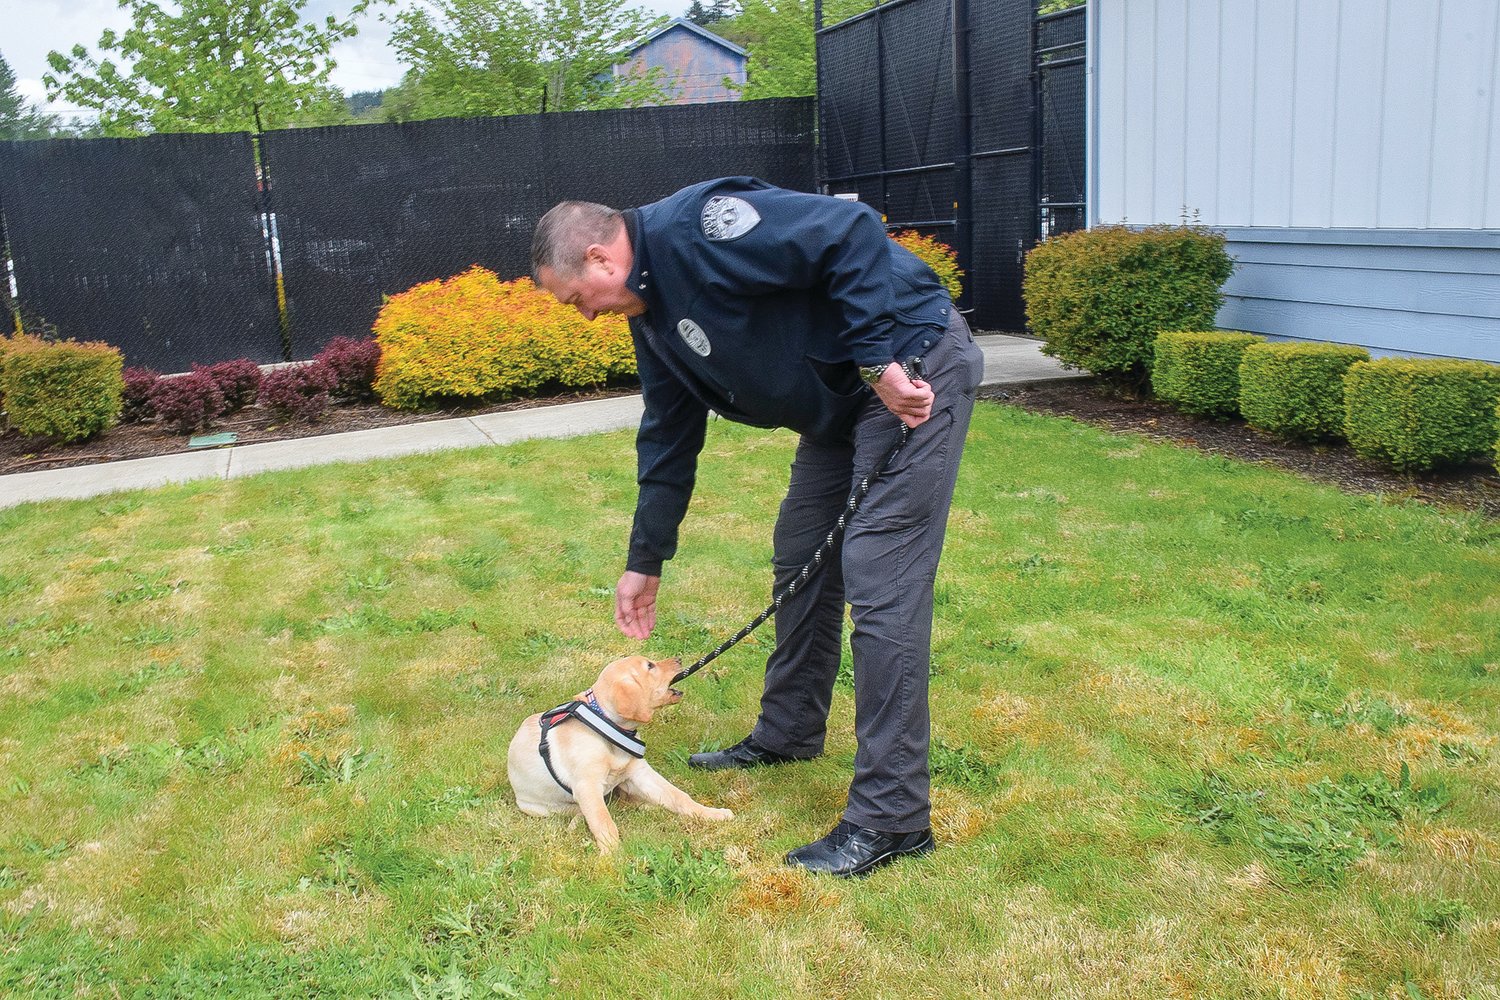 Woodland Police Chief Jim Kelly tries to bring Bolo back into the police station May 13.